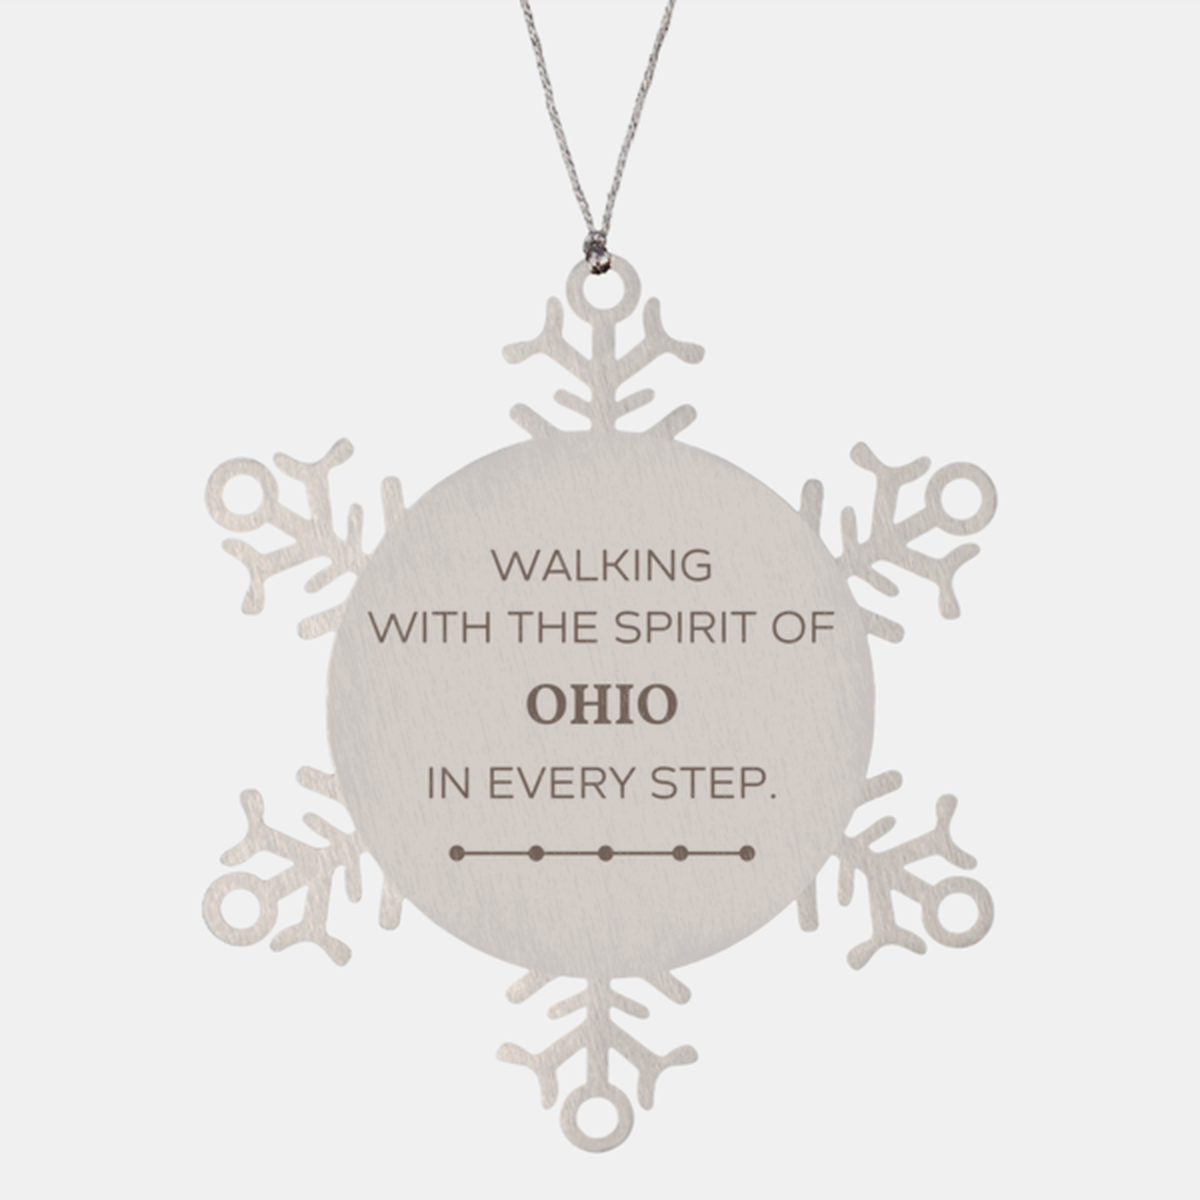 Ohio Gifts, Walking with the spirit, Love Ohio Birthday Christmas Snowflake Ornament For Ohio People, Men, Women, Friends